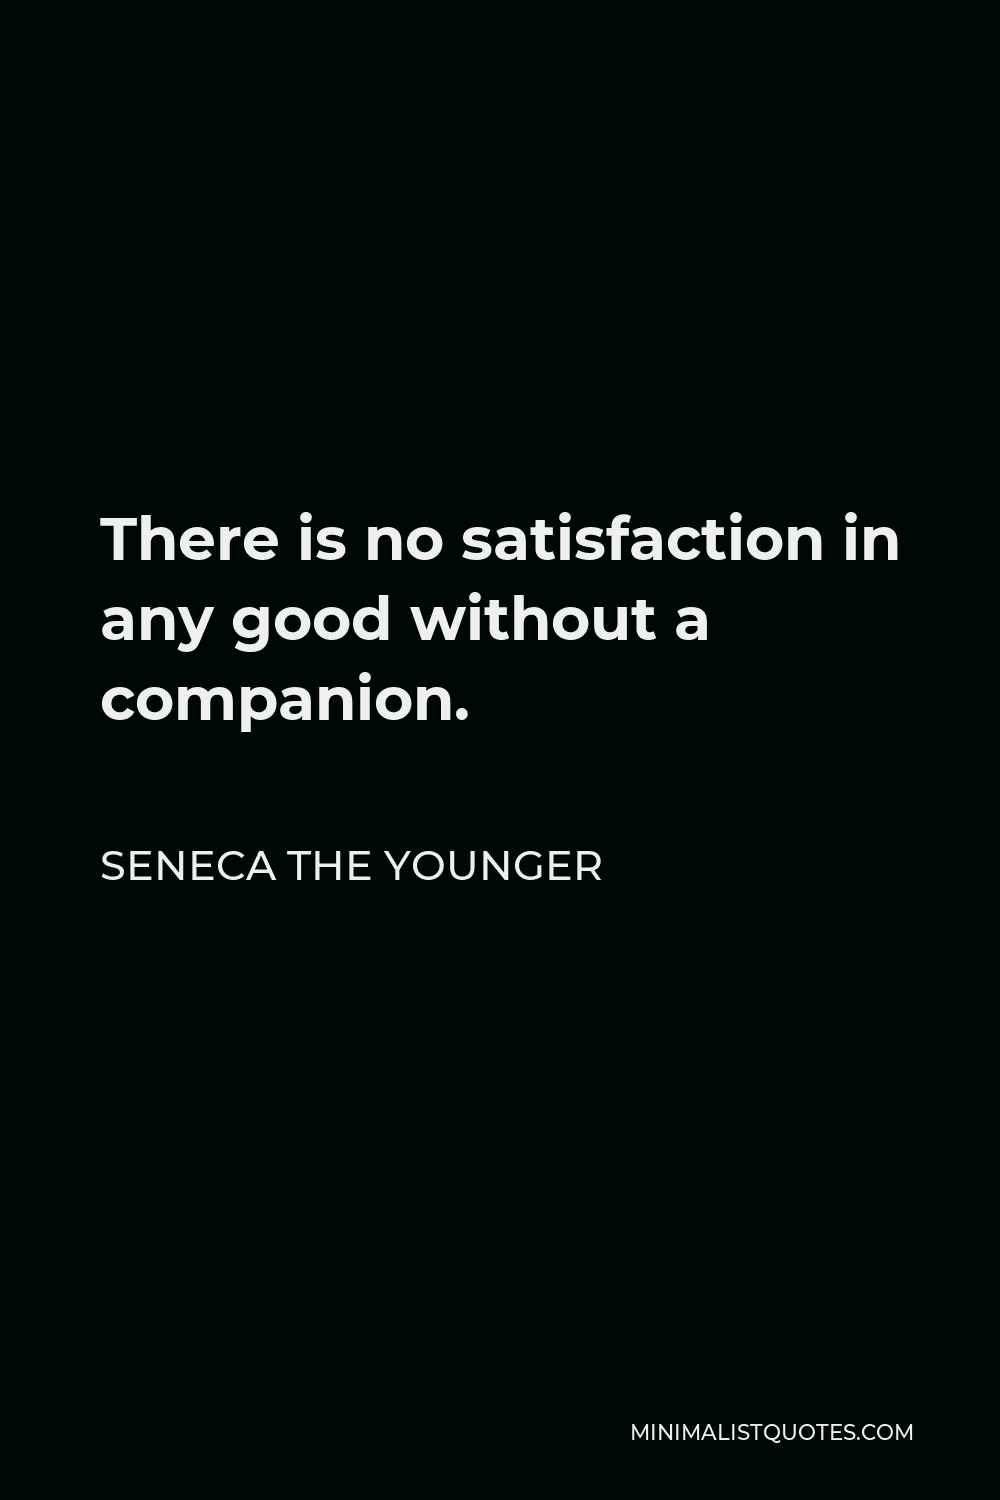 Seneca the Younger Quote - There is no satisfaction in any good without a companion.